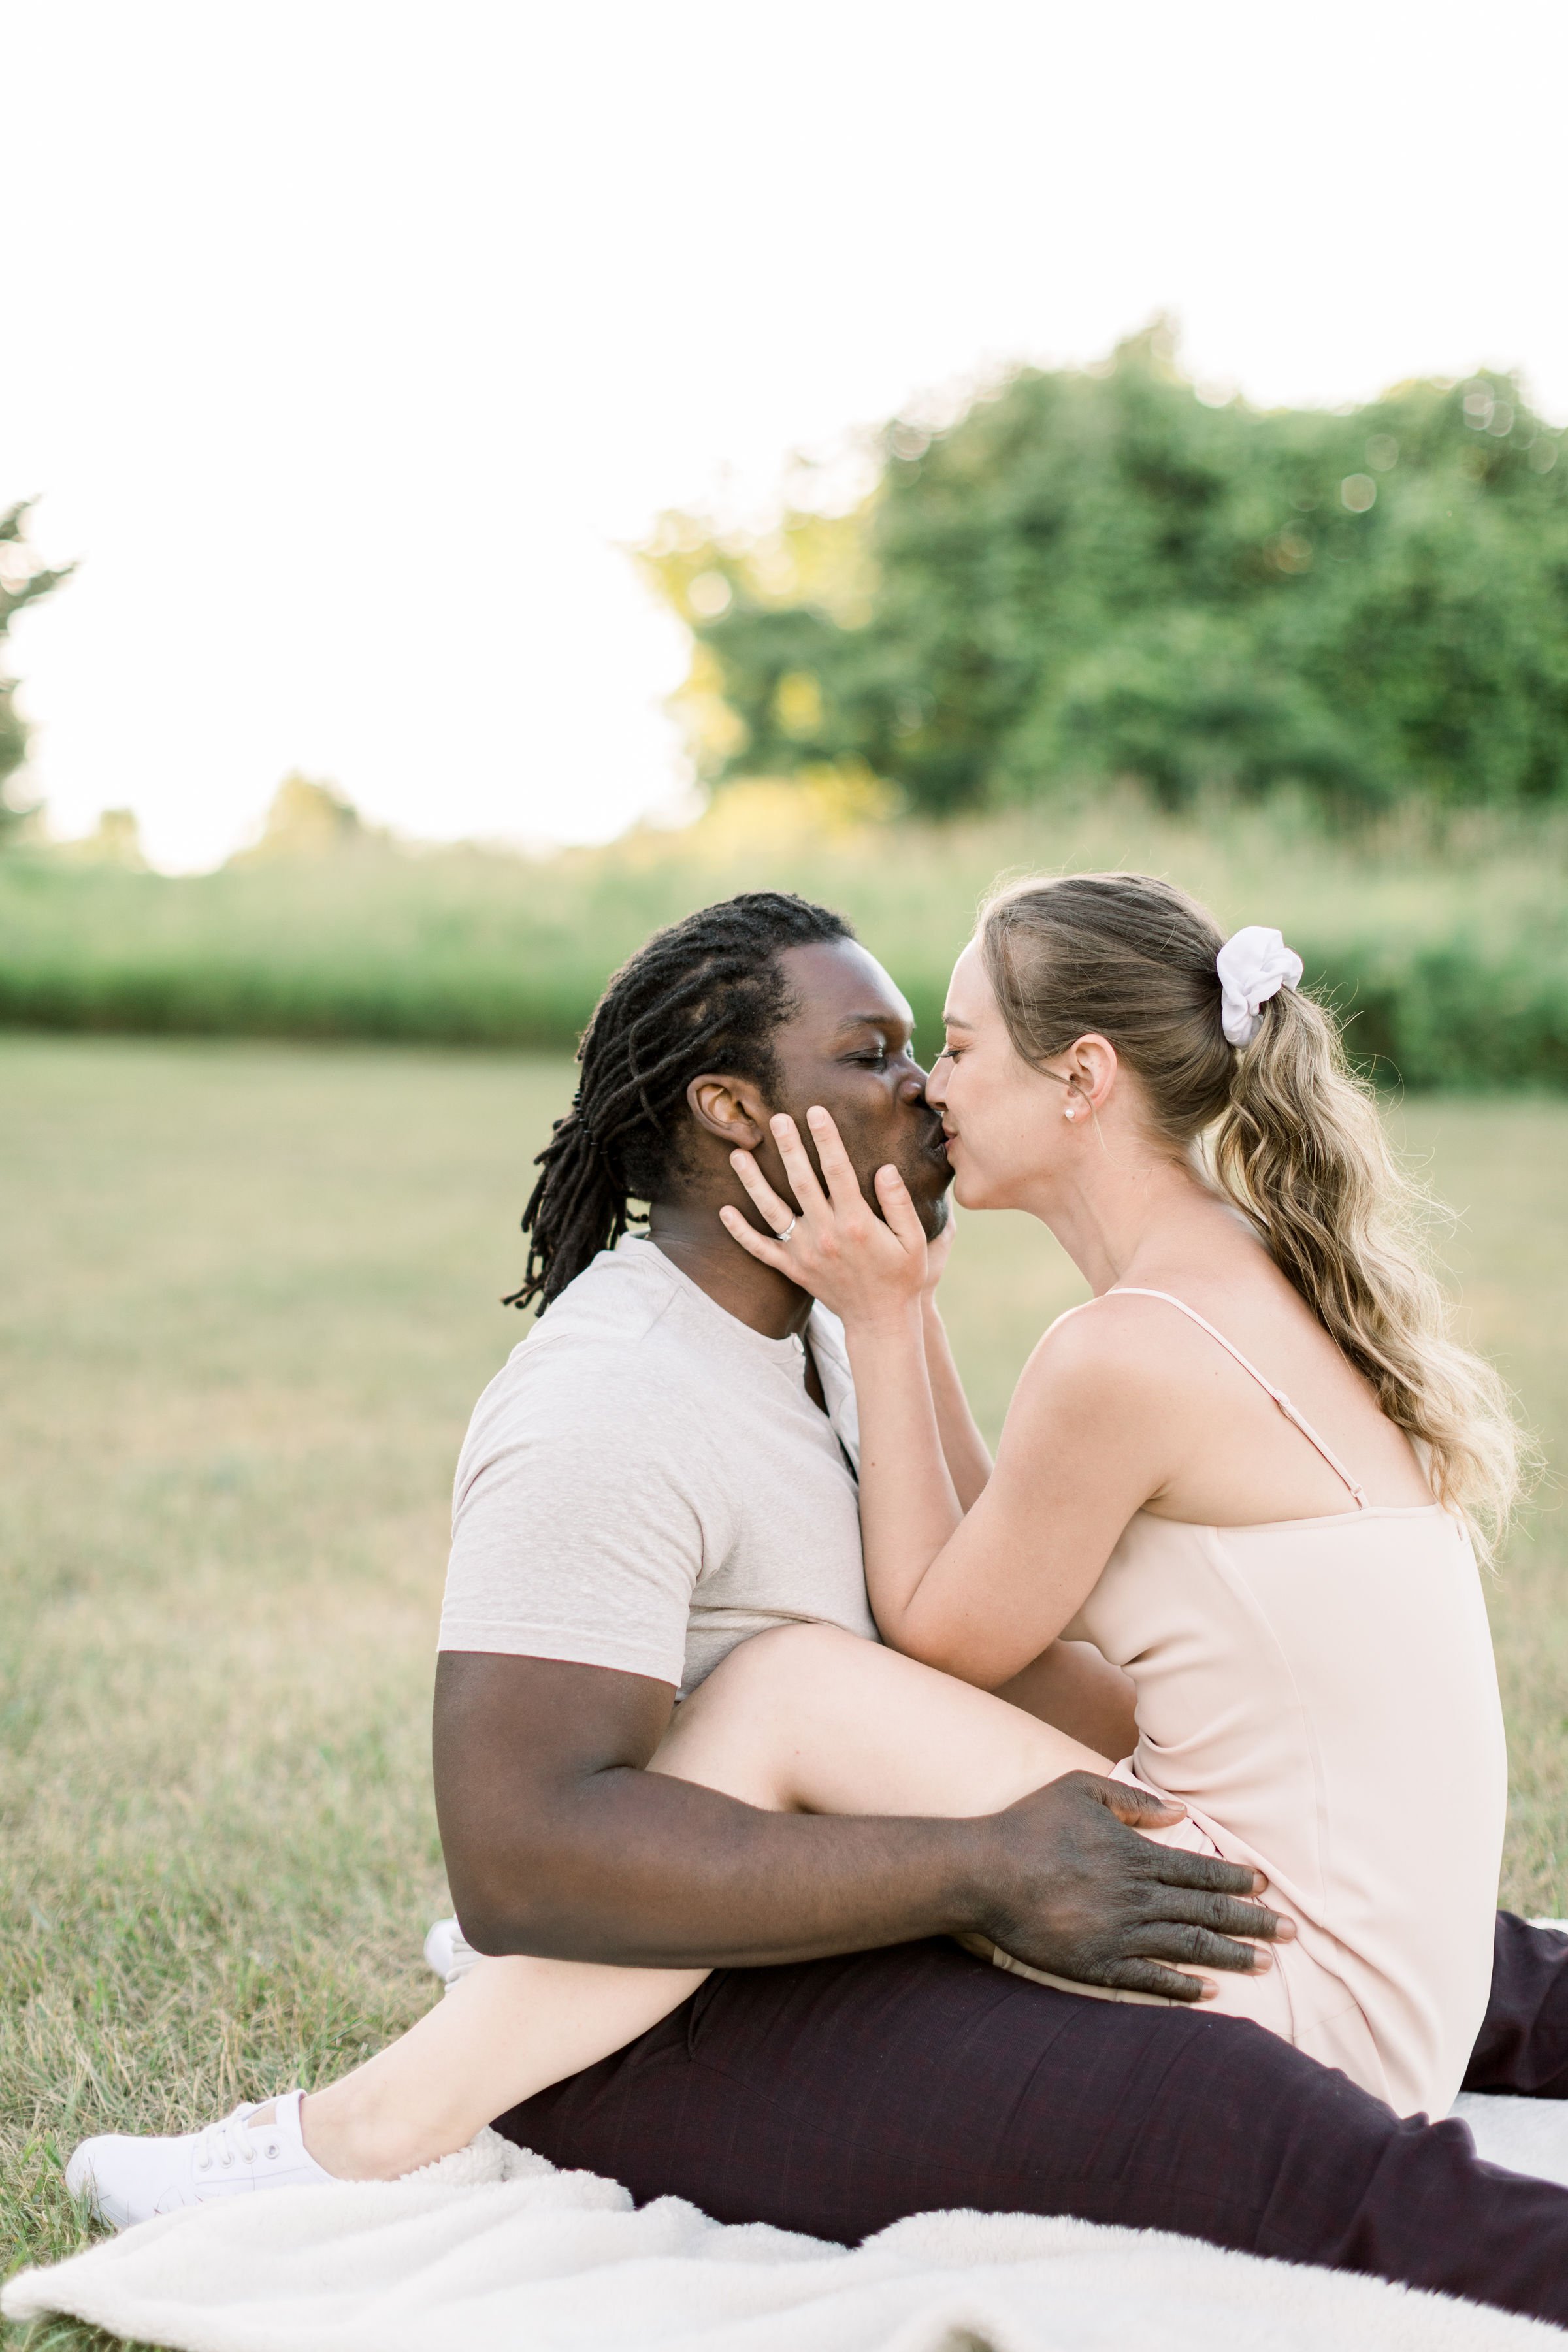  Picnic engagement portraits with a woman kissing a man while sitting on his lap by Chelsea Mason Photography. picnic engagement #Chelseamasonphotography #Chelseamasonengagements #Onatarioengagements #Pinhey'sPoint #Ontarioweddingphotographers 